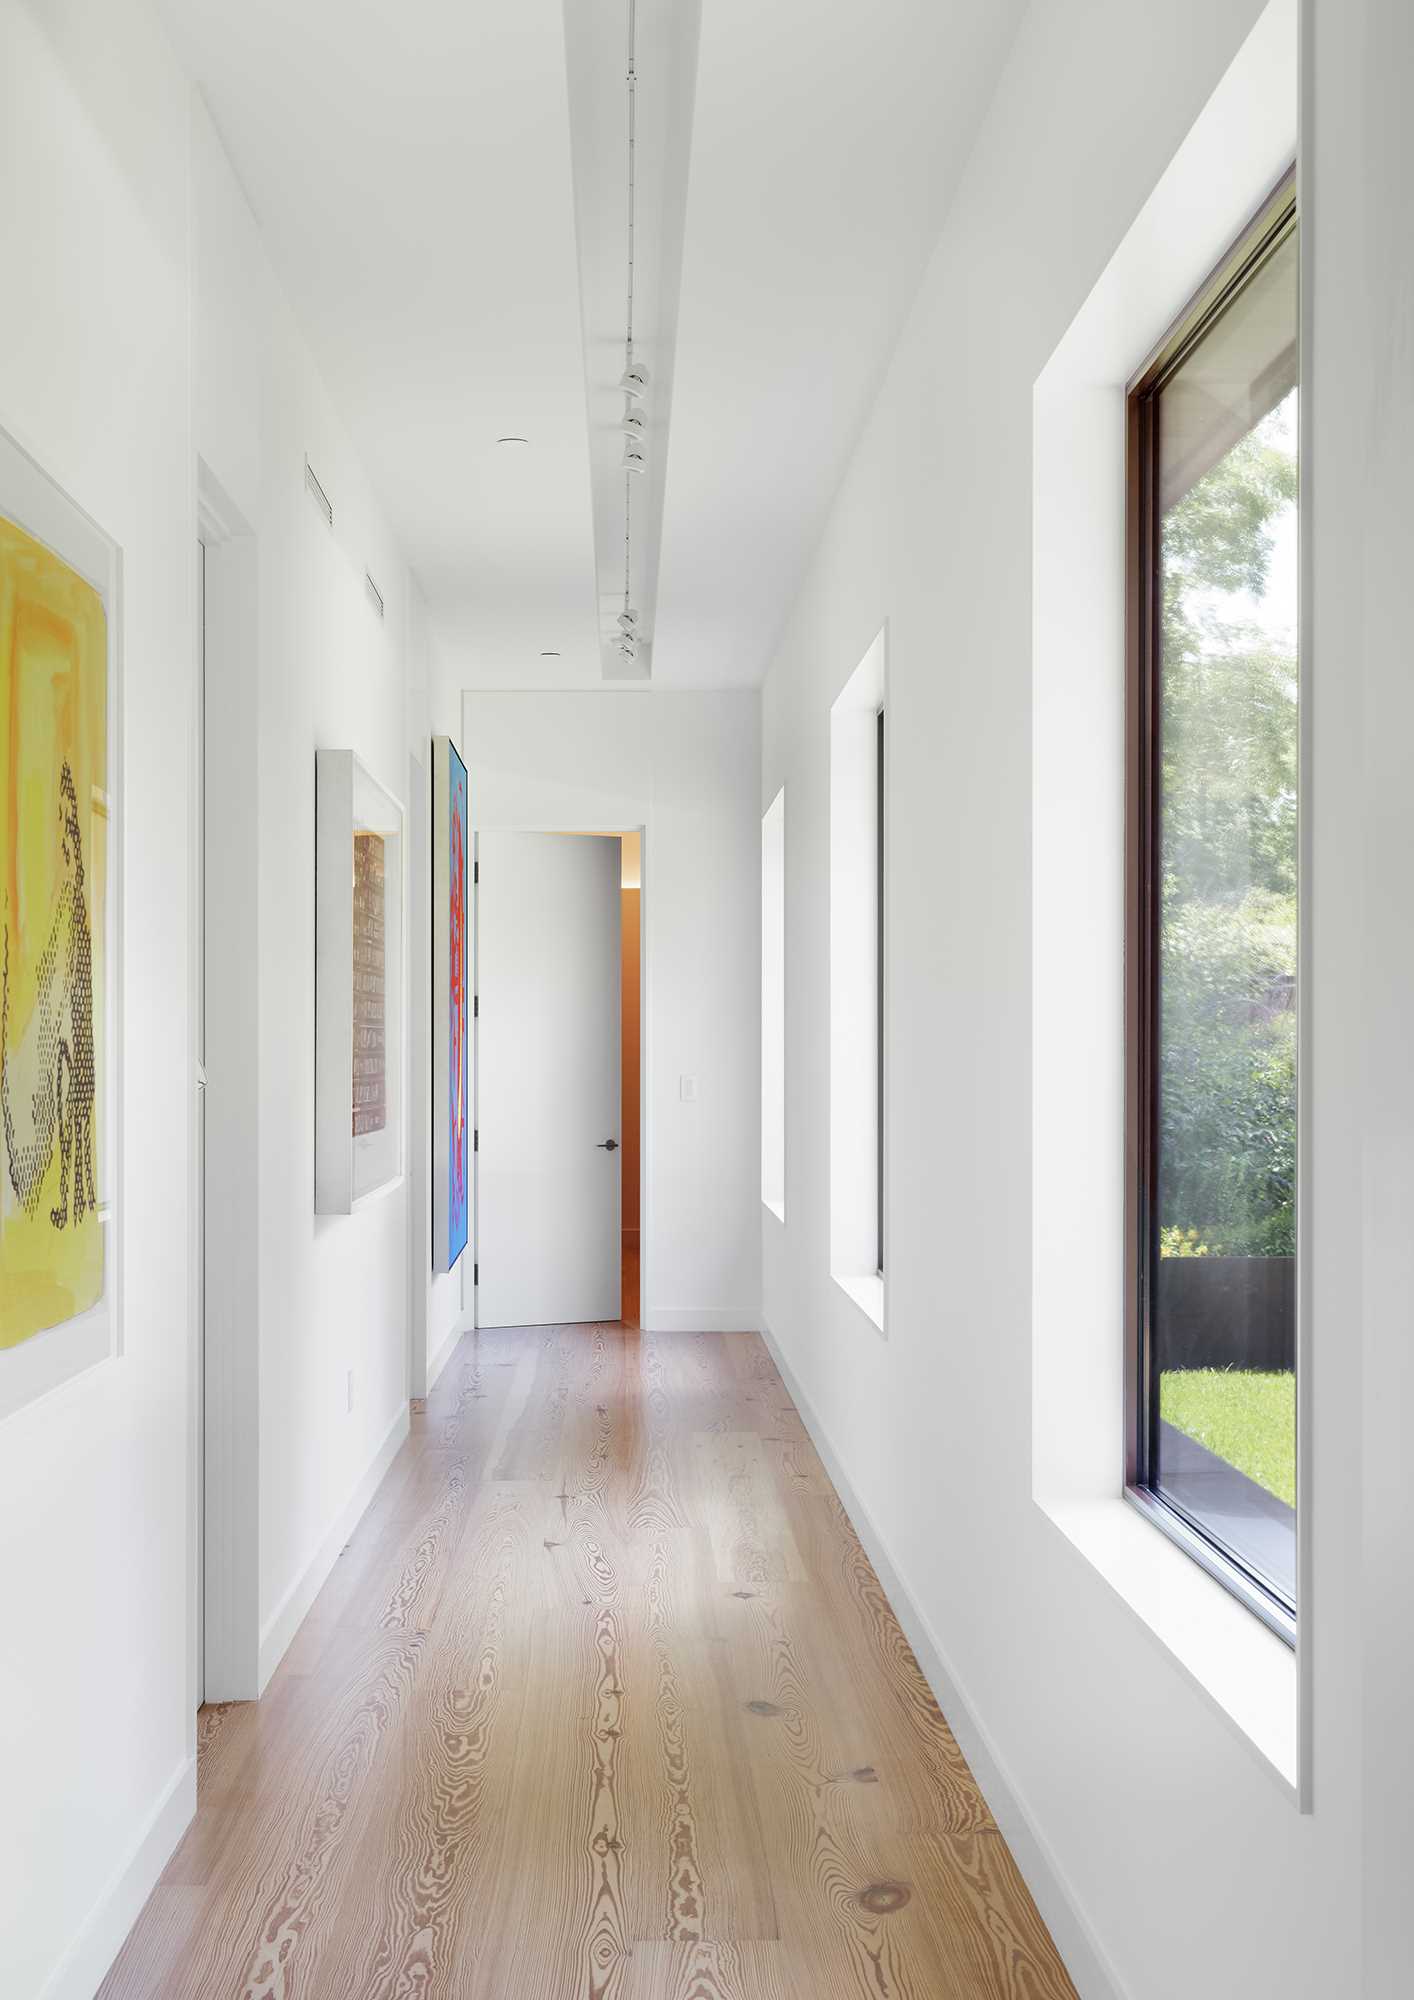 In the hallway, artwork adds a pop of color to the white walls.